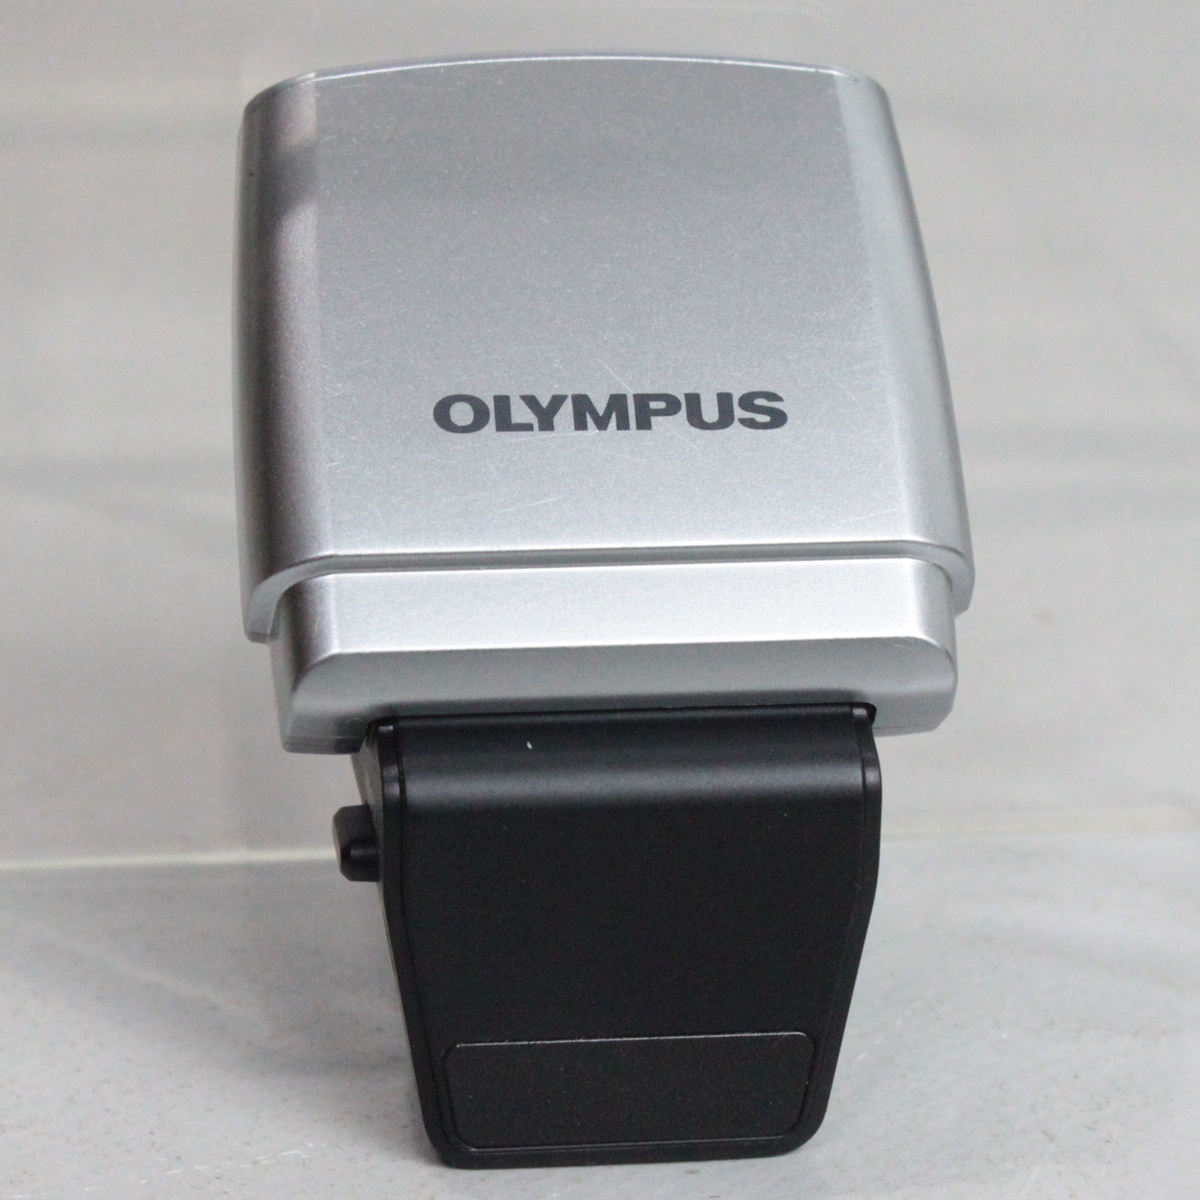 031668 [ superior article Olympus ] OLYMPUS electronic flash FL-LM1 for PEN mini